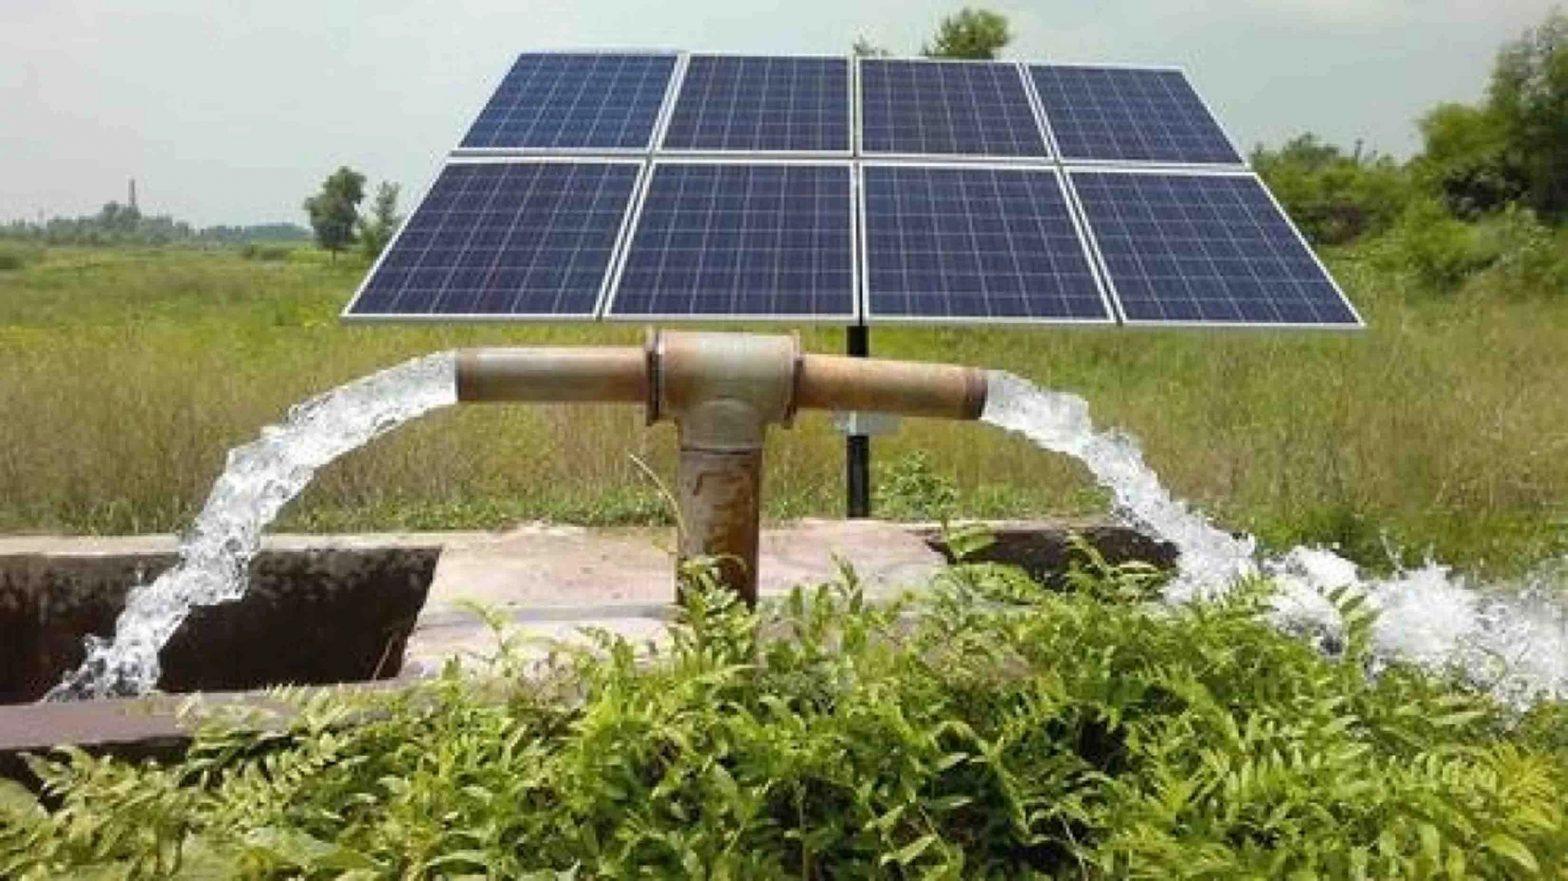 Haryana topped in installation of solar pumps under PM-KUSUM